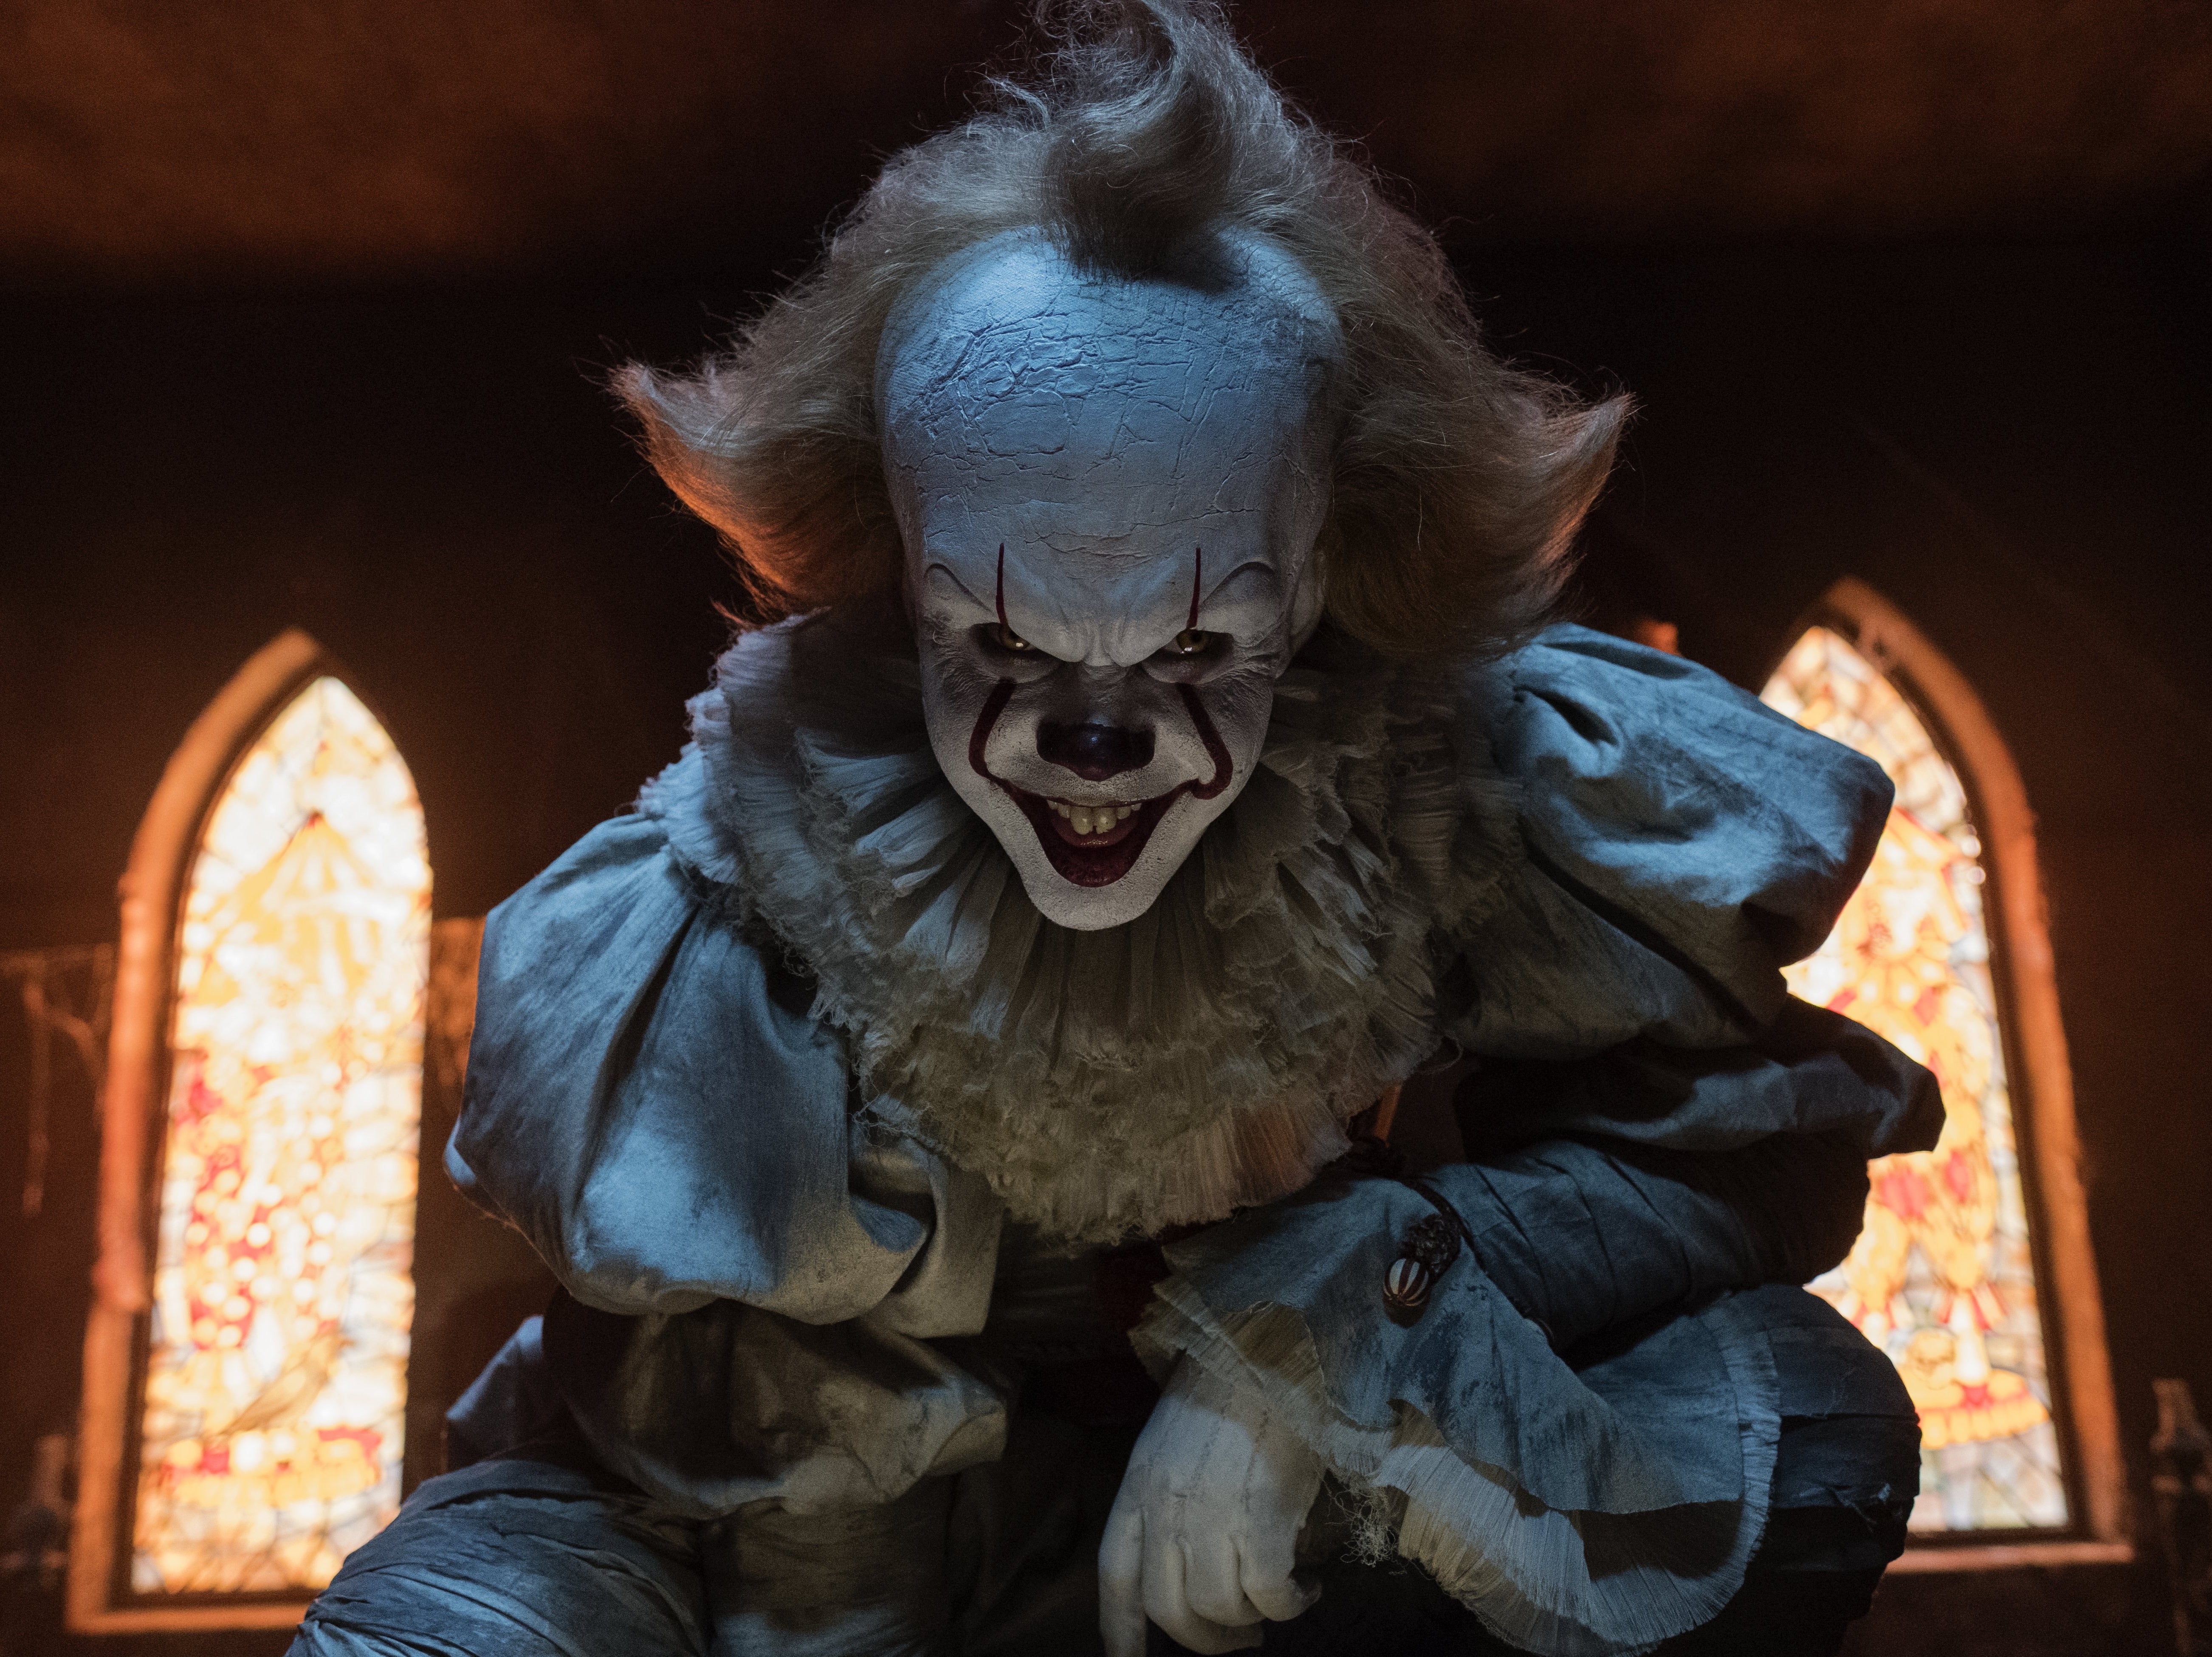 Stephen King’s ‘It’ plays on its audience’s fear of clowns